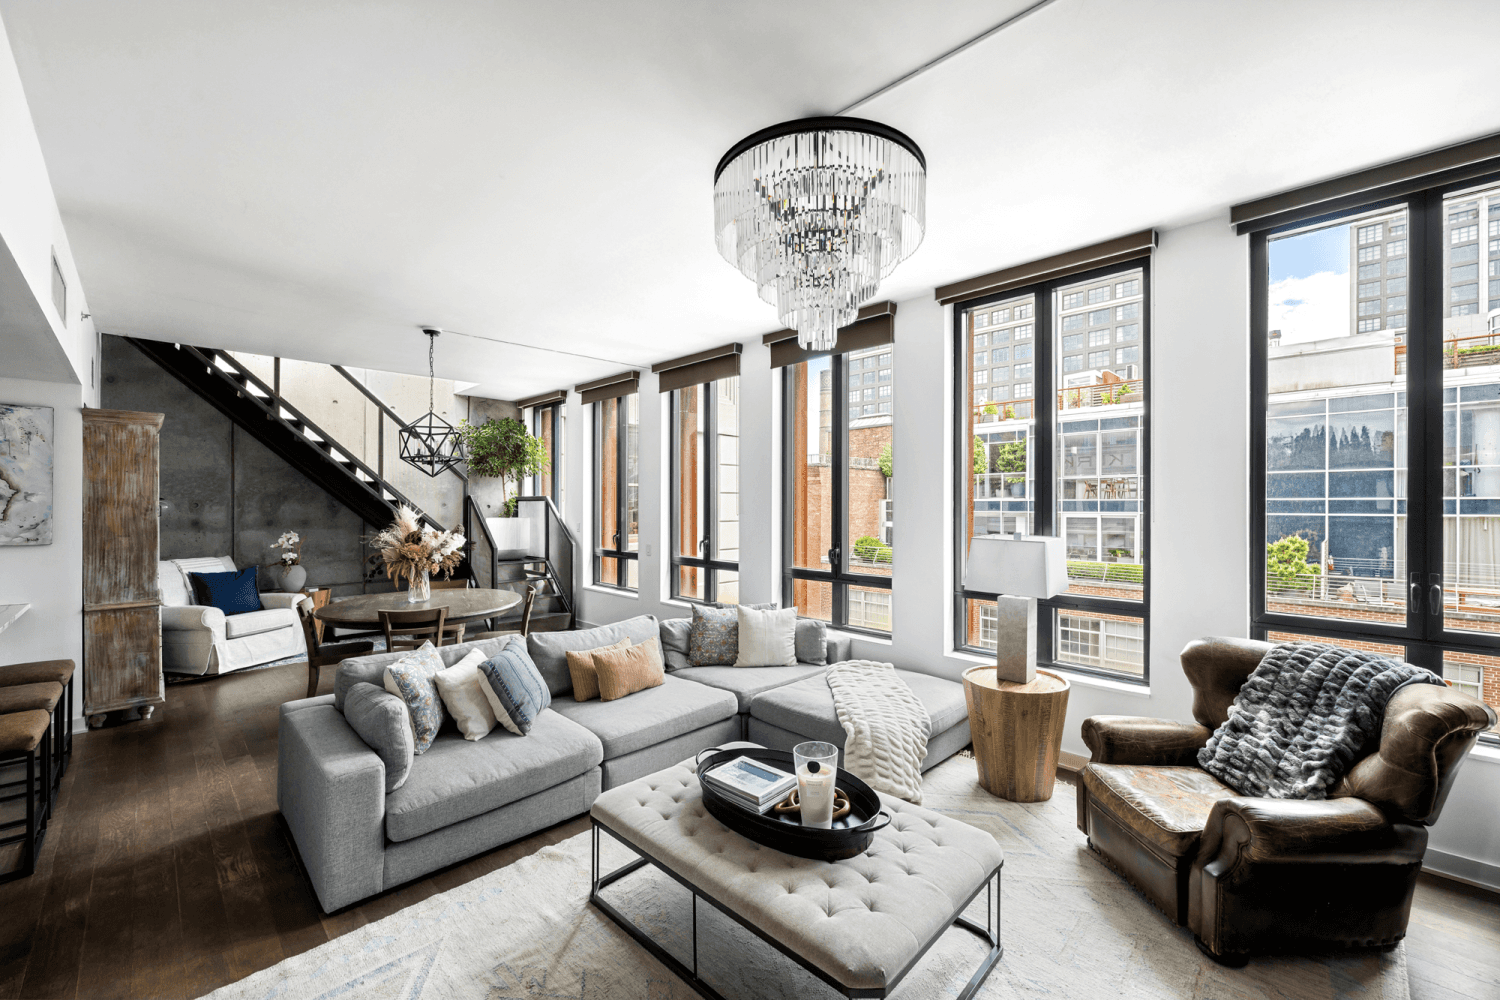 Experience authentic Dumbo loft living with a private rooftop terrace in this luxurious 3 bedroom, 2 bathroom condo boasting soaring 10 foot ceilings, huge walk in closets, and a dedicated ...